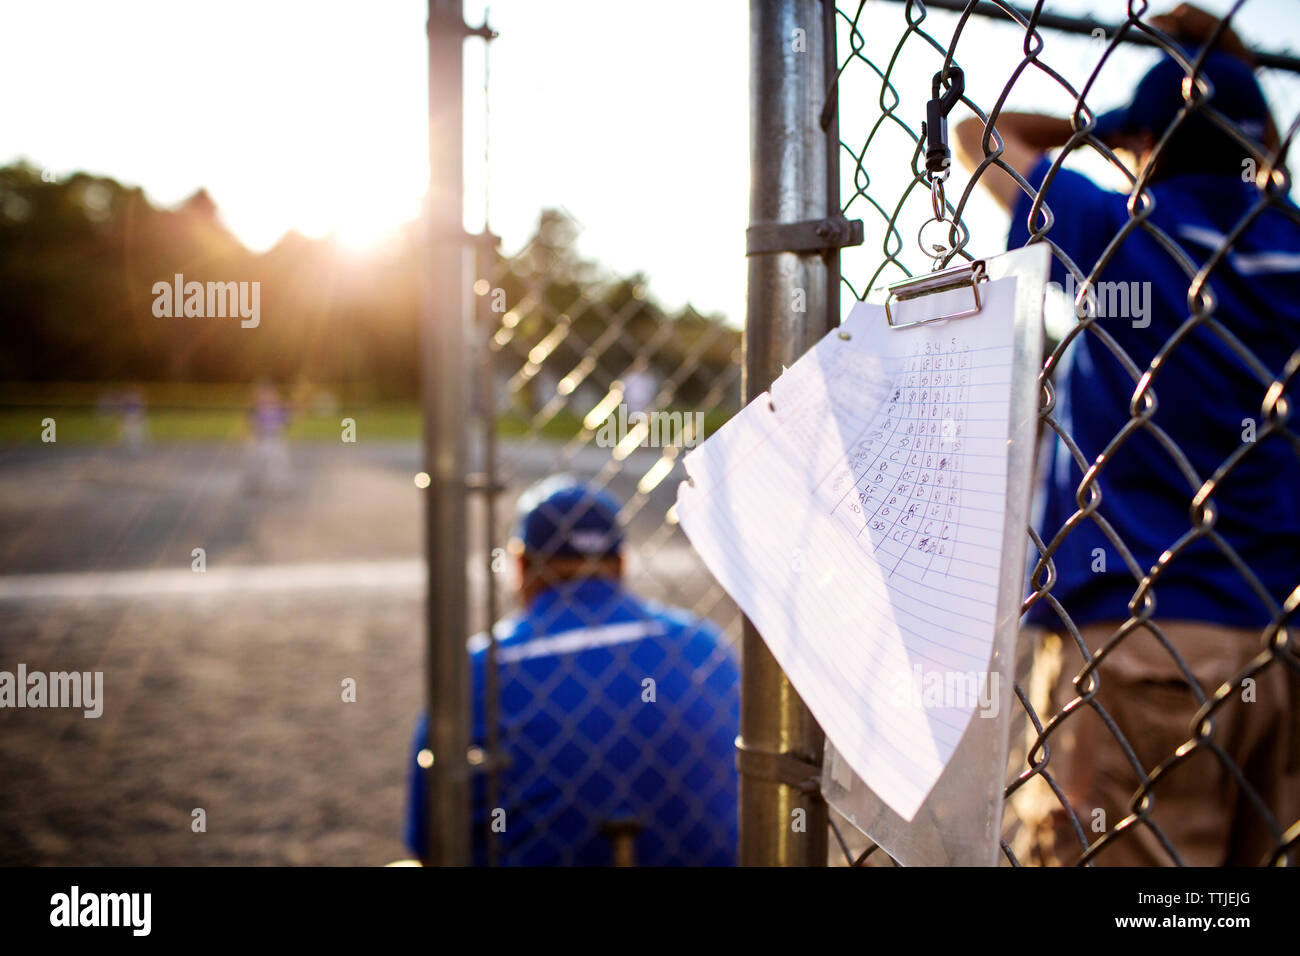 Score card hanging on fence with coach in background Stock Photo